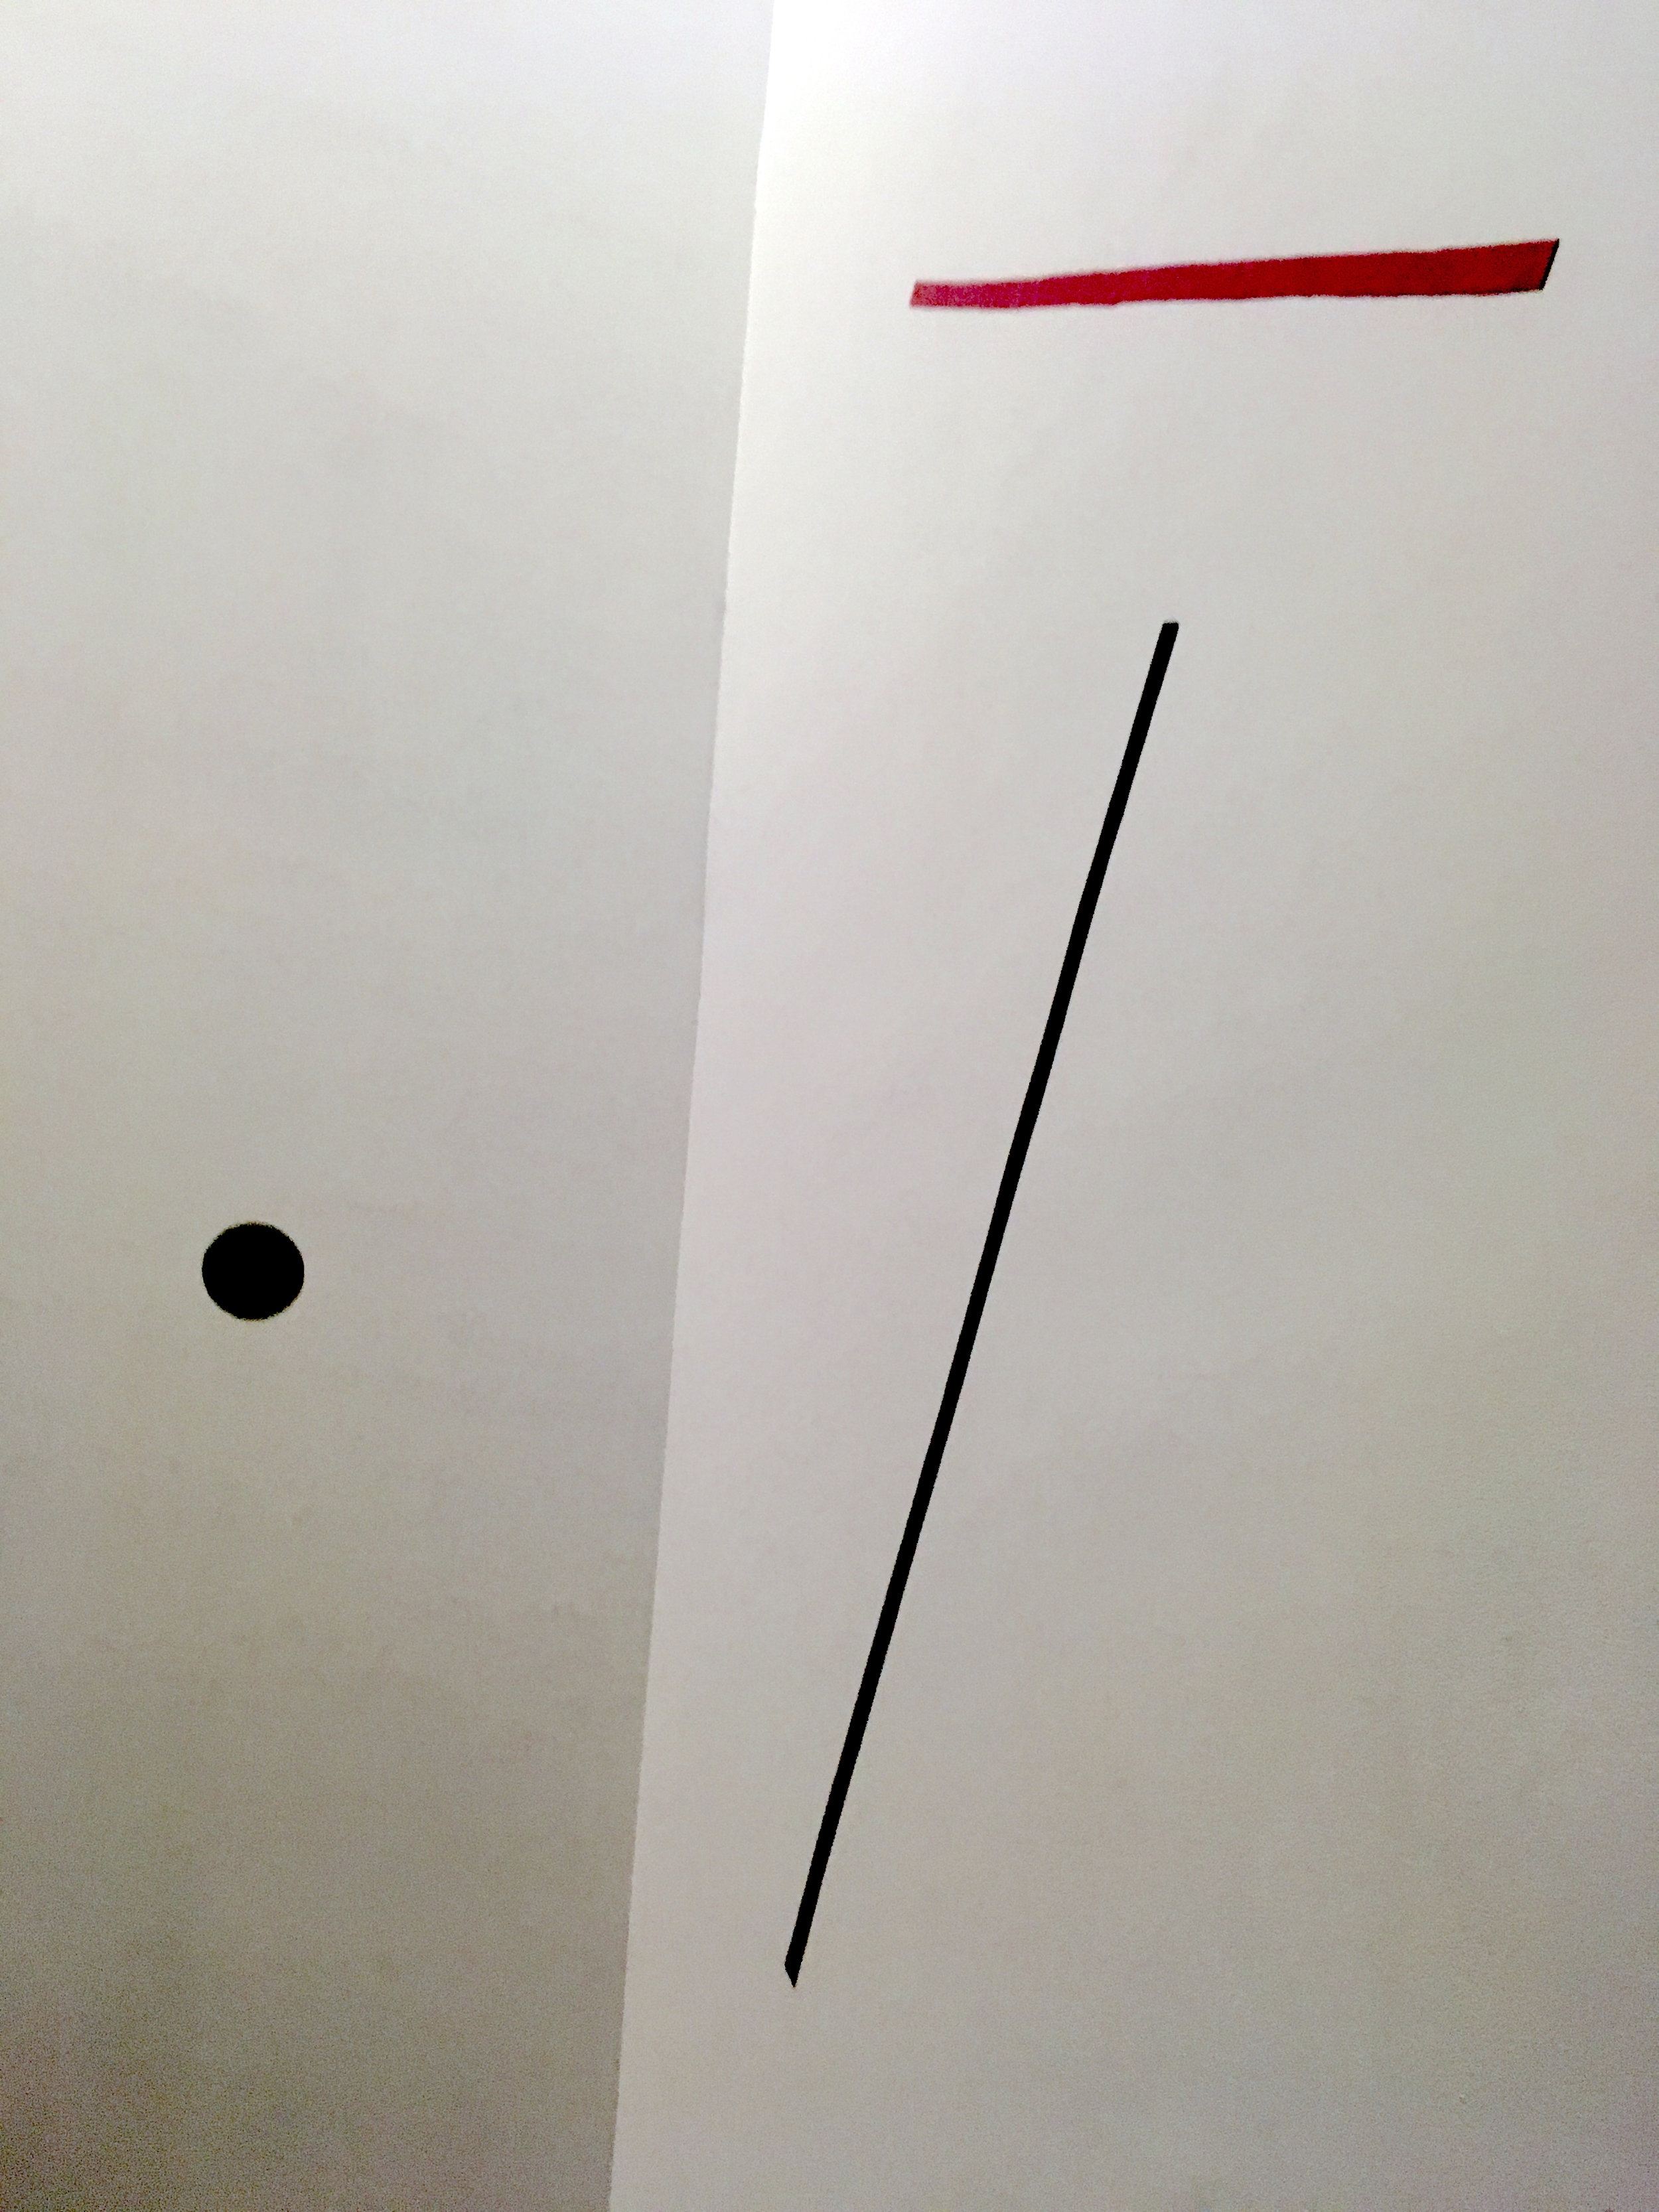  New Museum Trigger, Gender as a Tool and a Weapon This Corner, 2017  